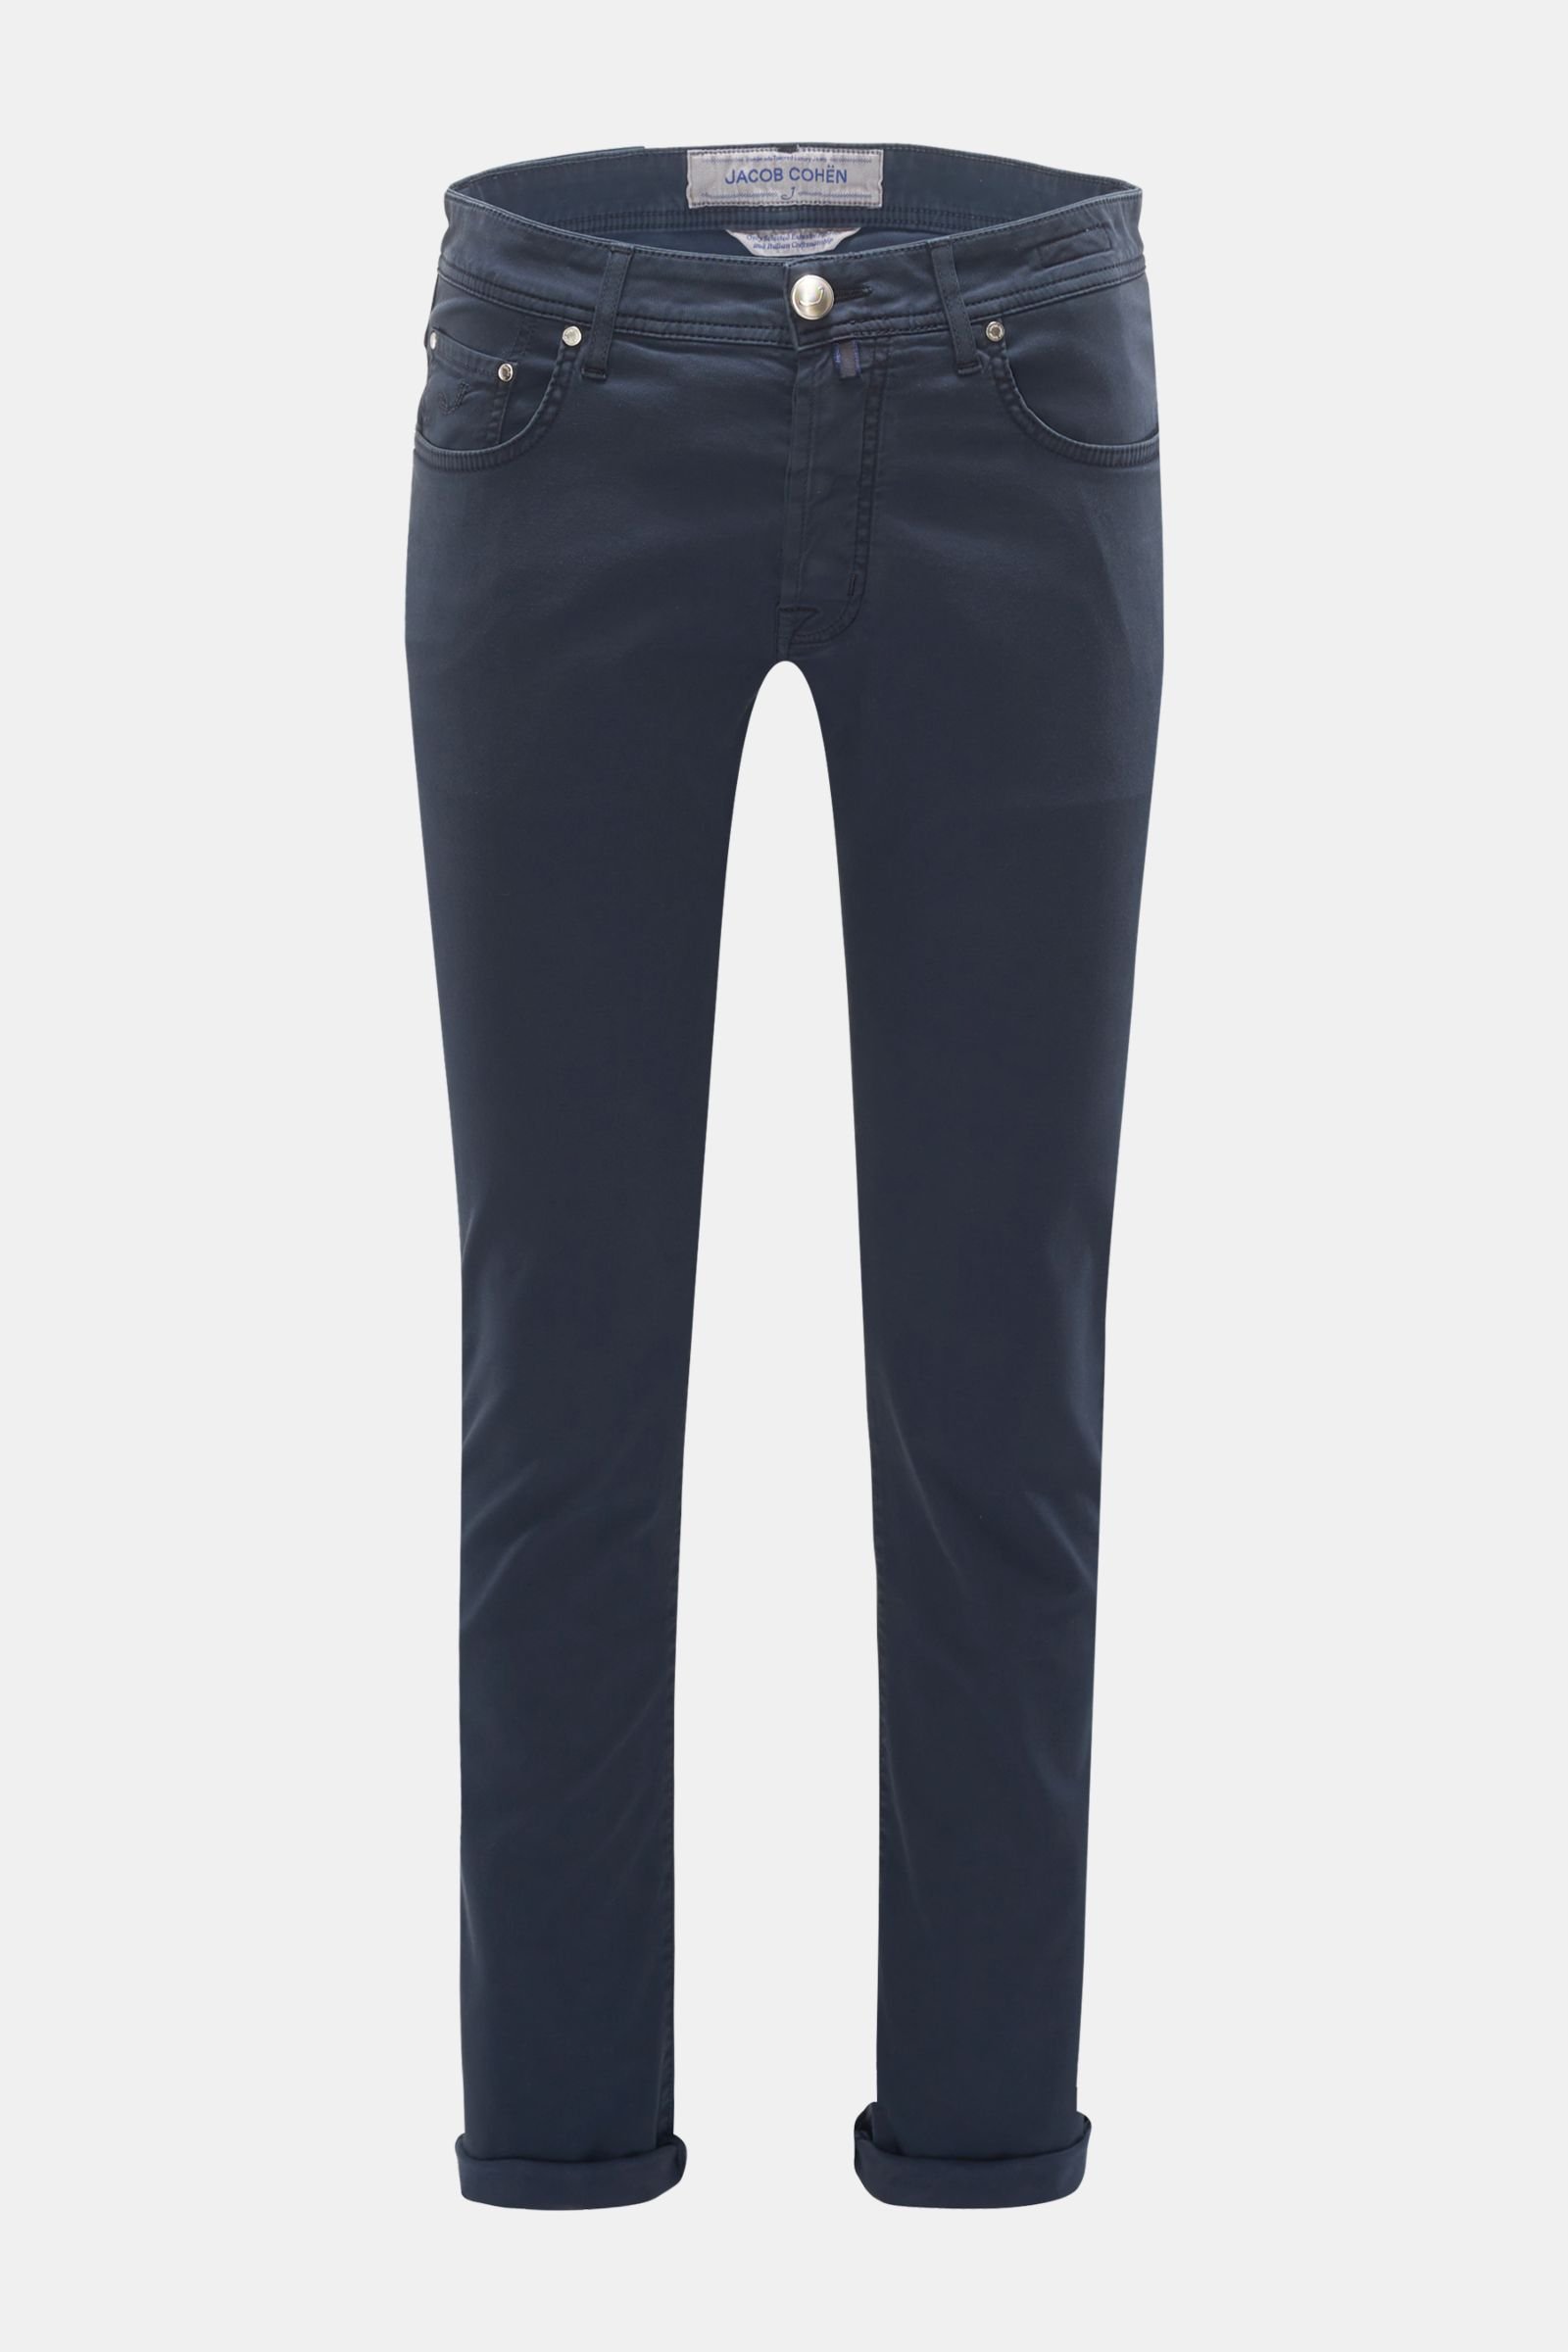 Trousers 'J688 Comfort Extra Slim Fit' navy